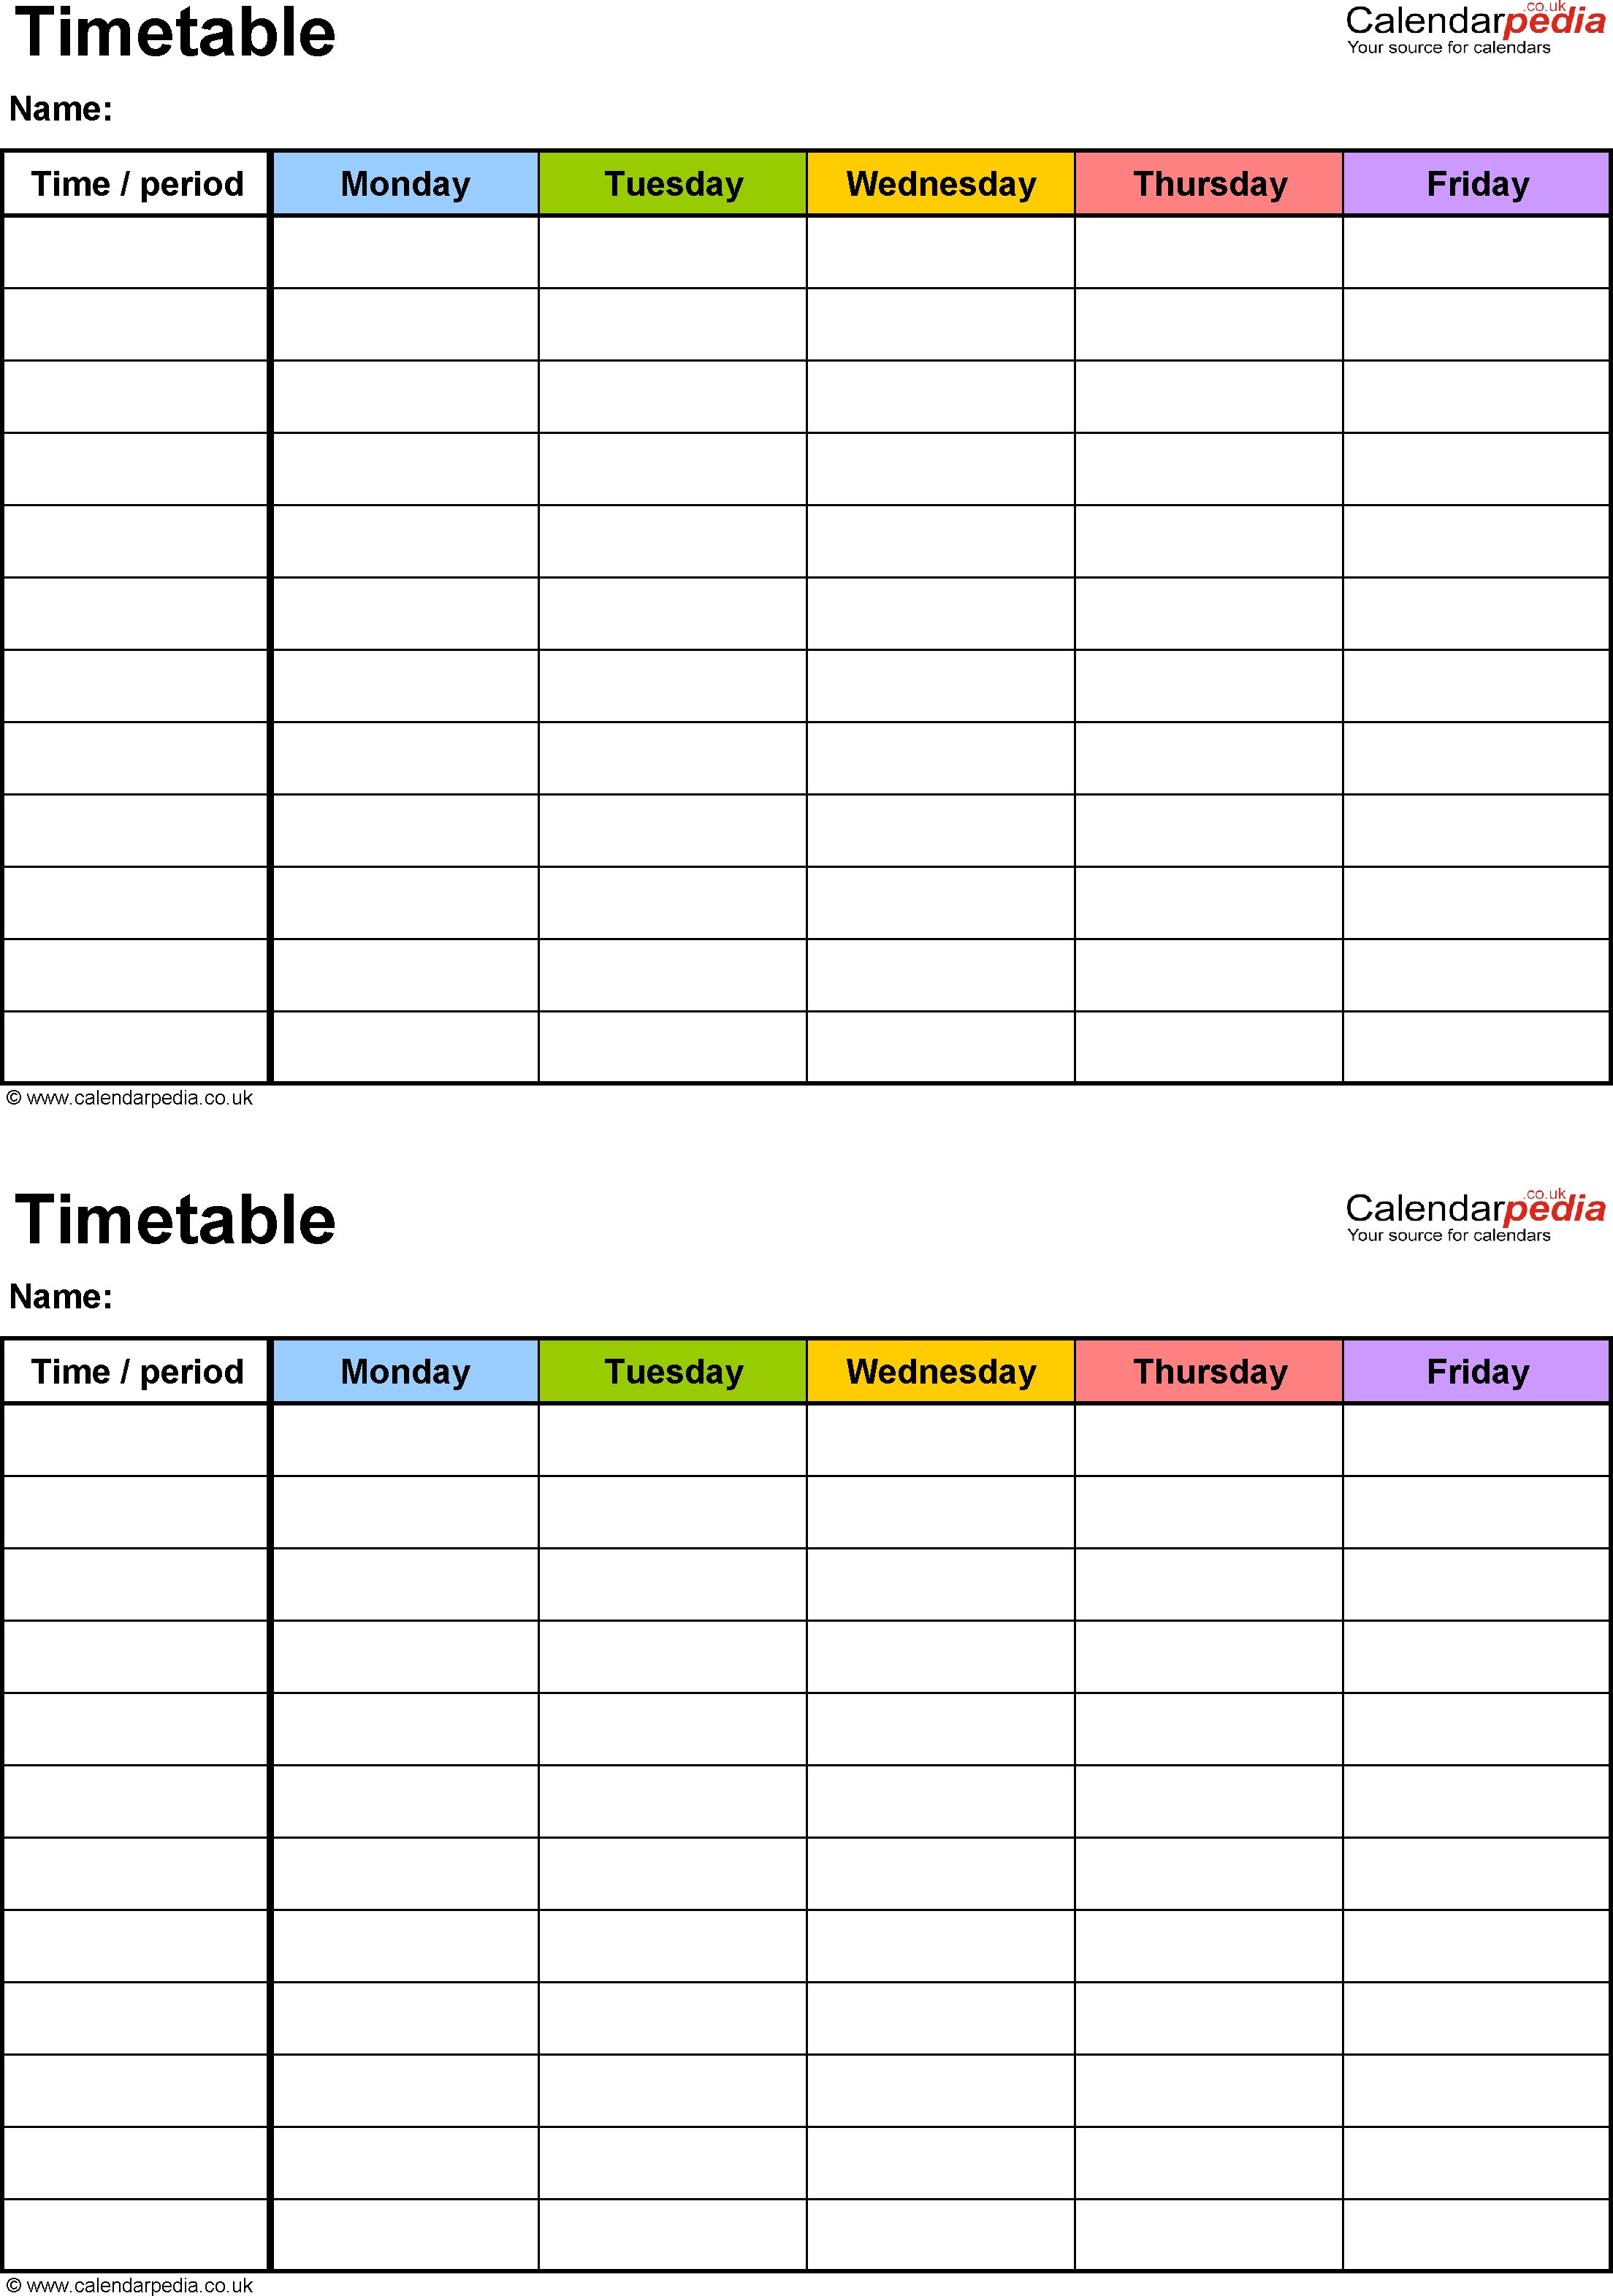 Excel Timetable Template 6: 2 A5 Timetables On One Page, Portrait 5 Day Appointment Calendar Template